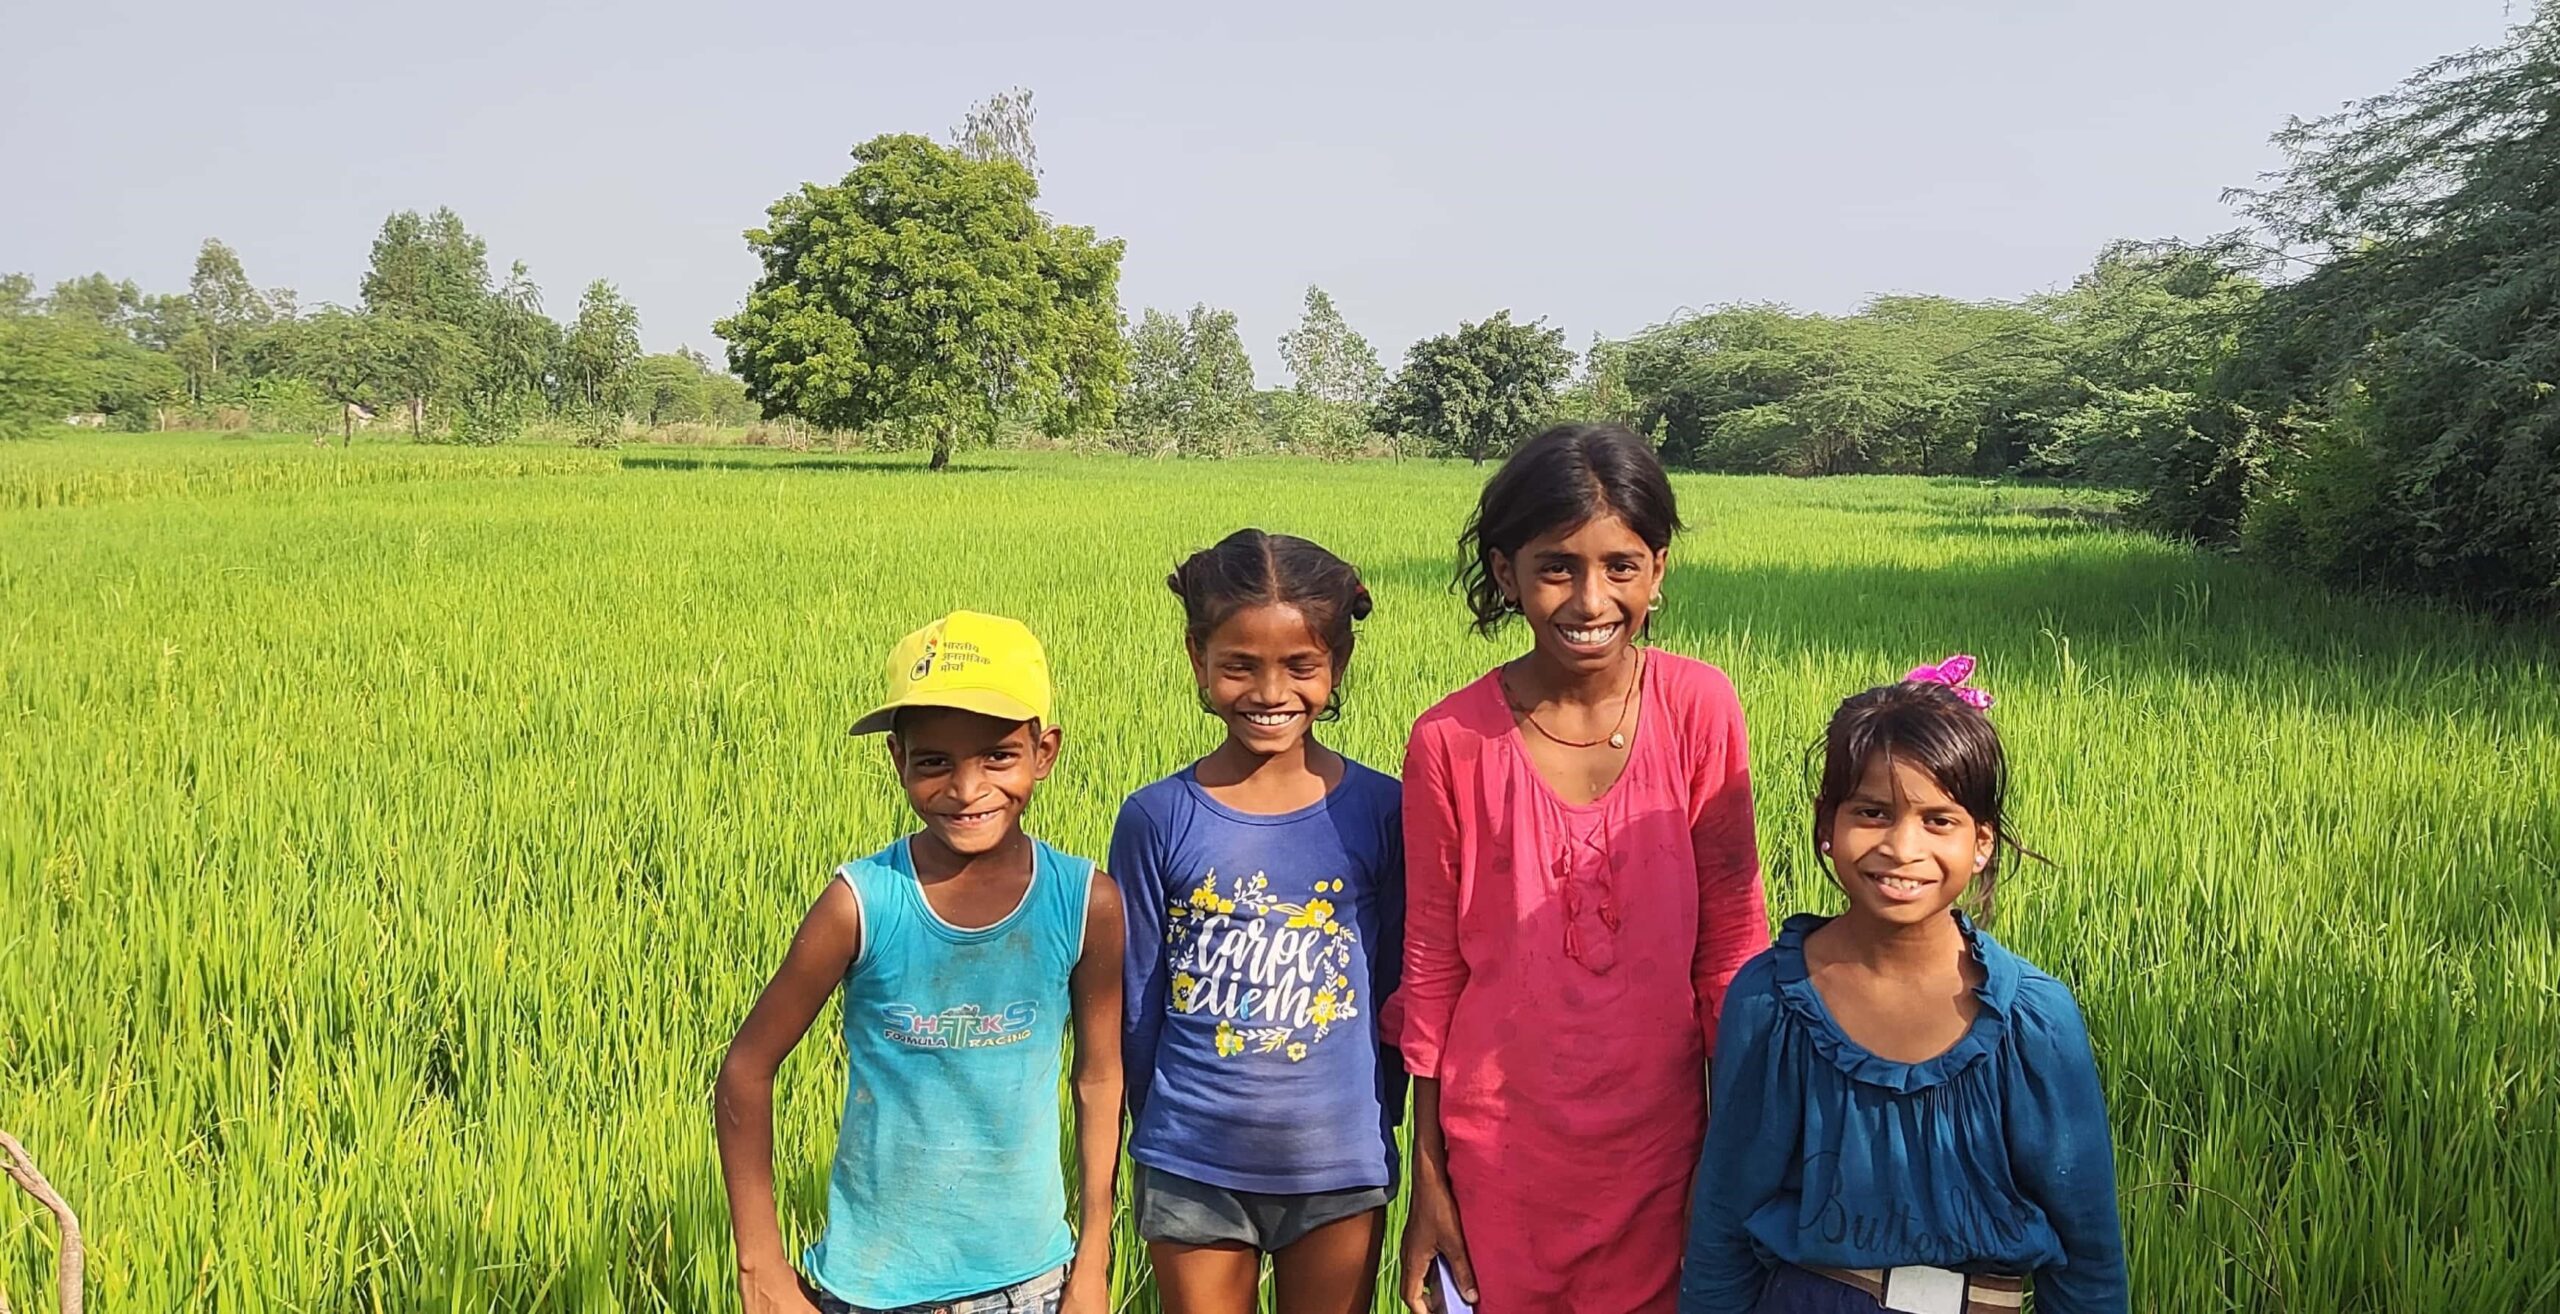 Children of an Indian Village scaled